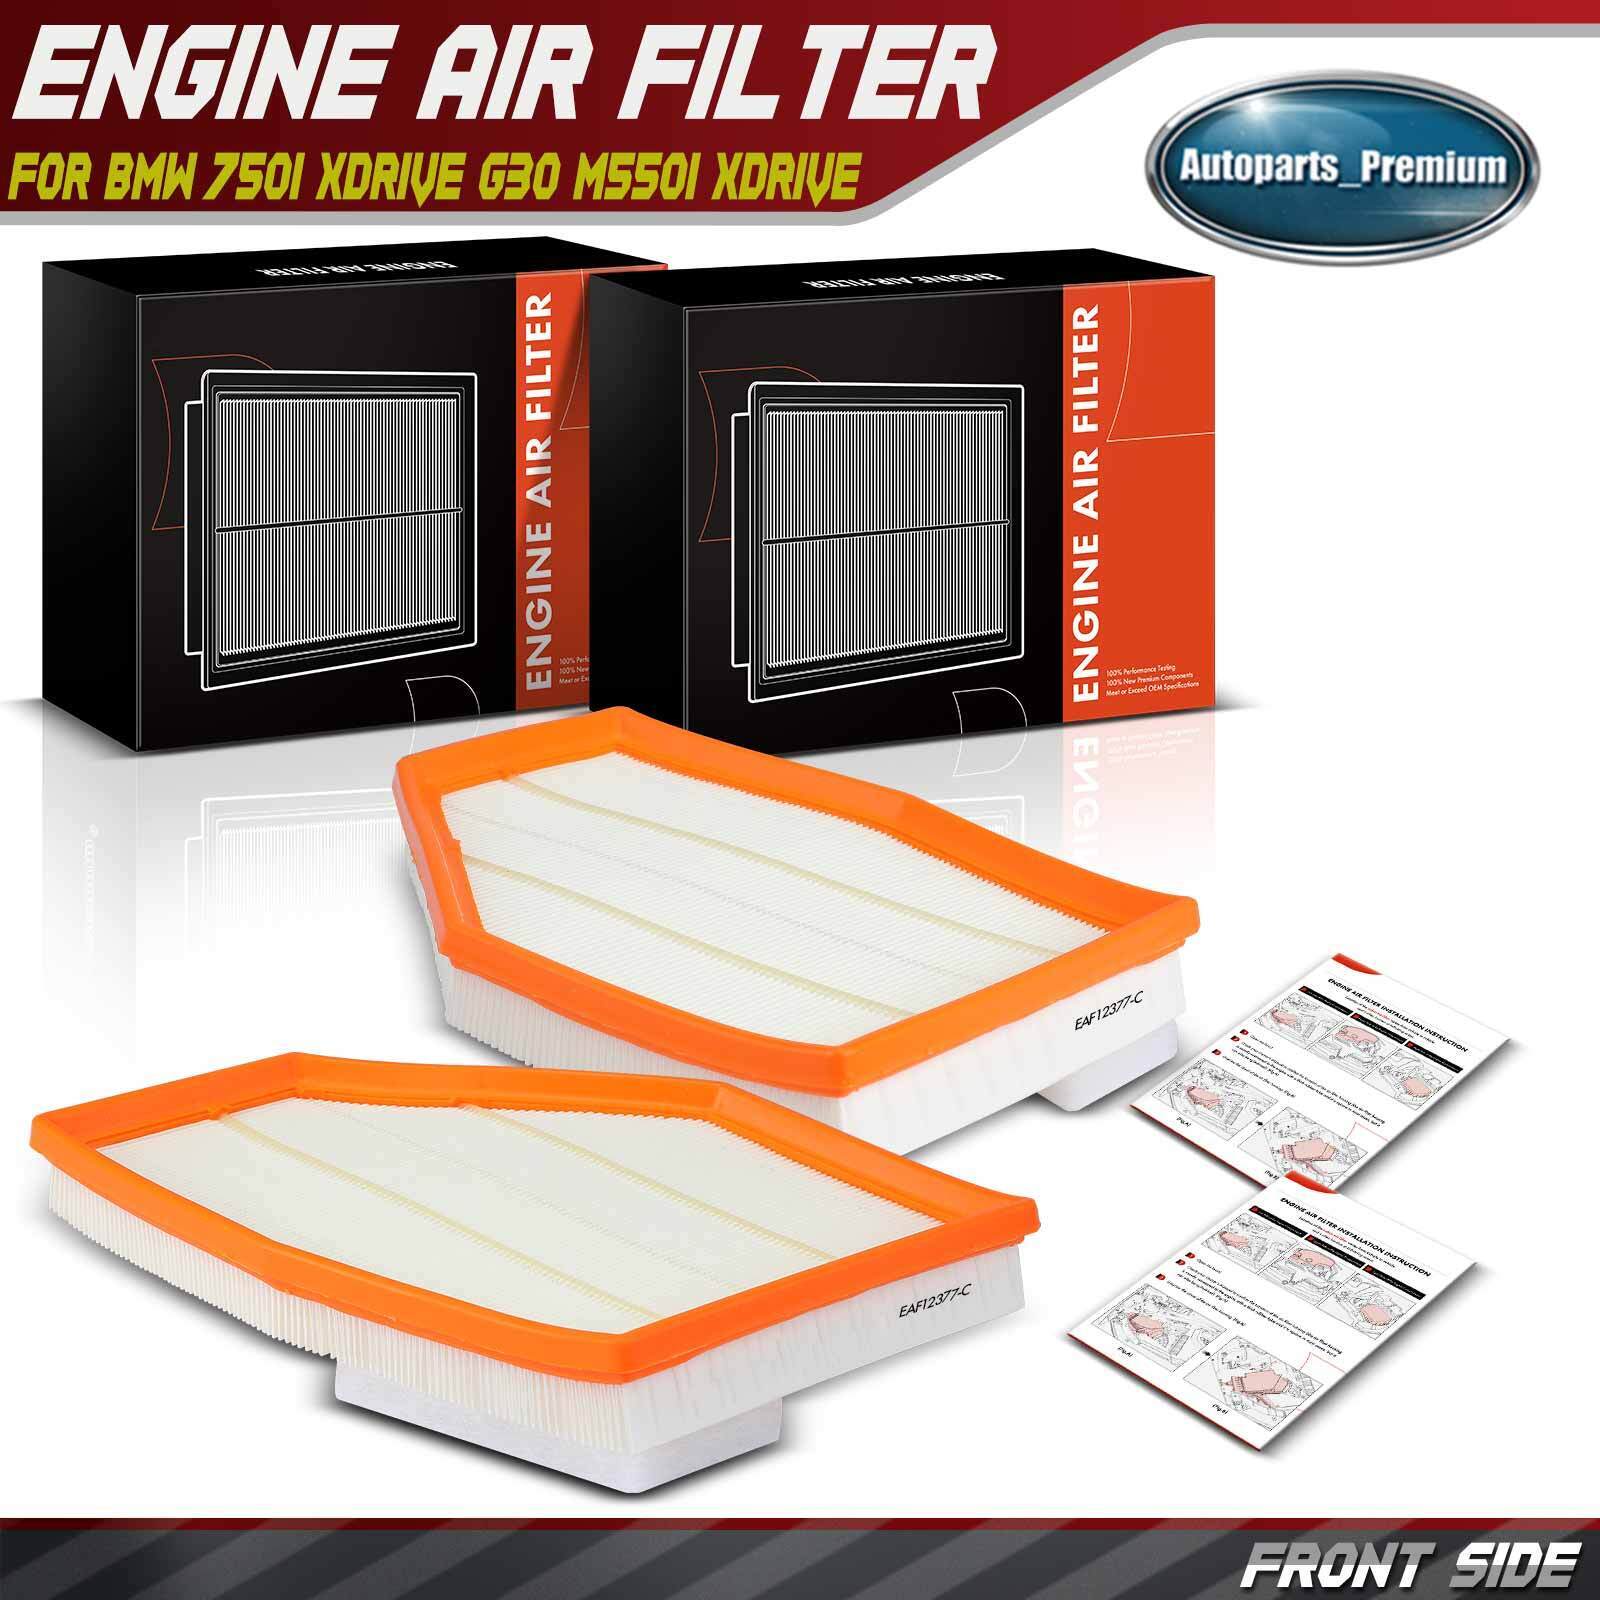 2x Left and Right Engine Air Filter for BMW G11 750i xDrive G30 M550i xDrive G16